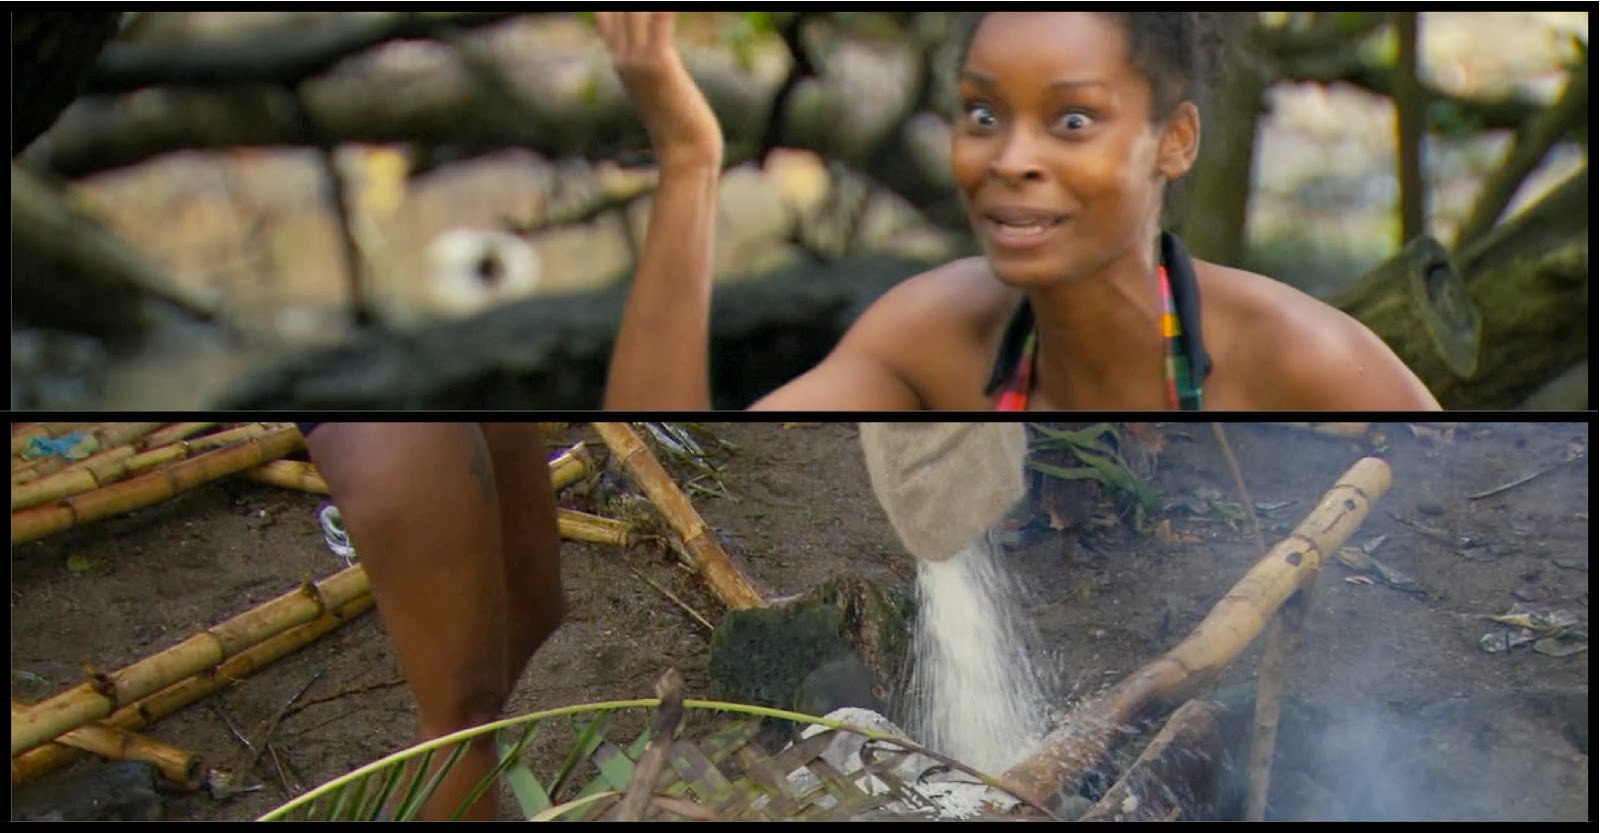 J'Tia - latest member of Survivor to be eliminated.